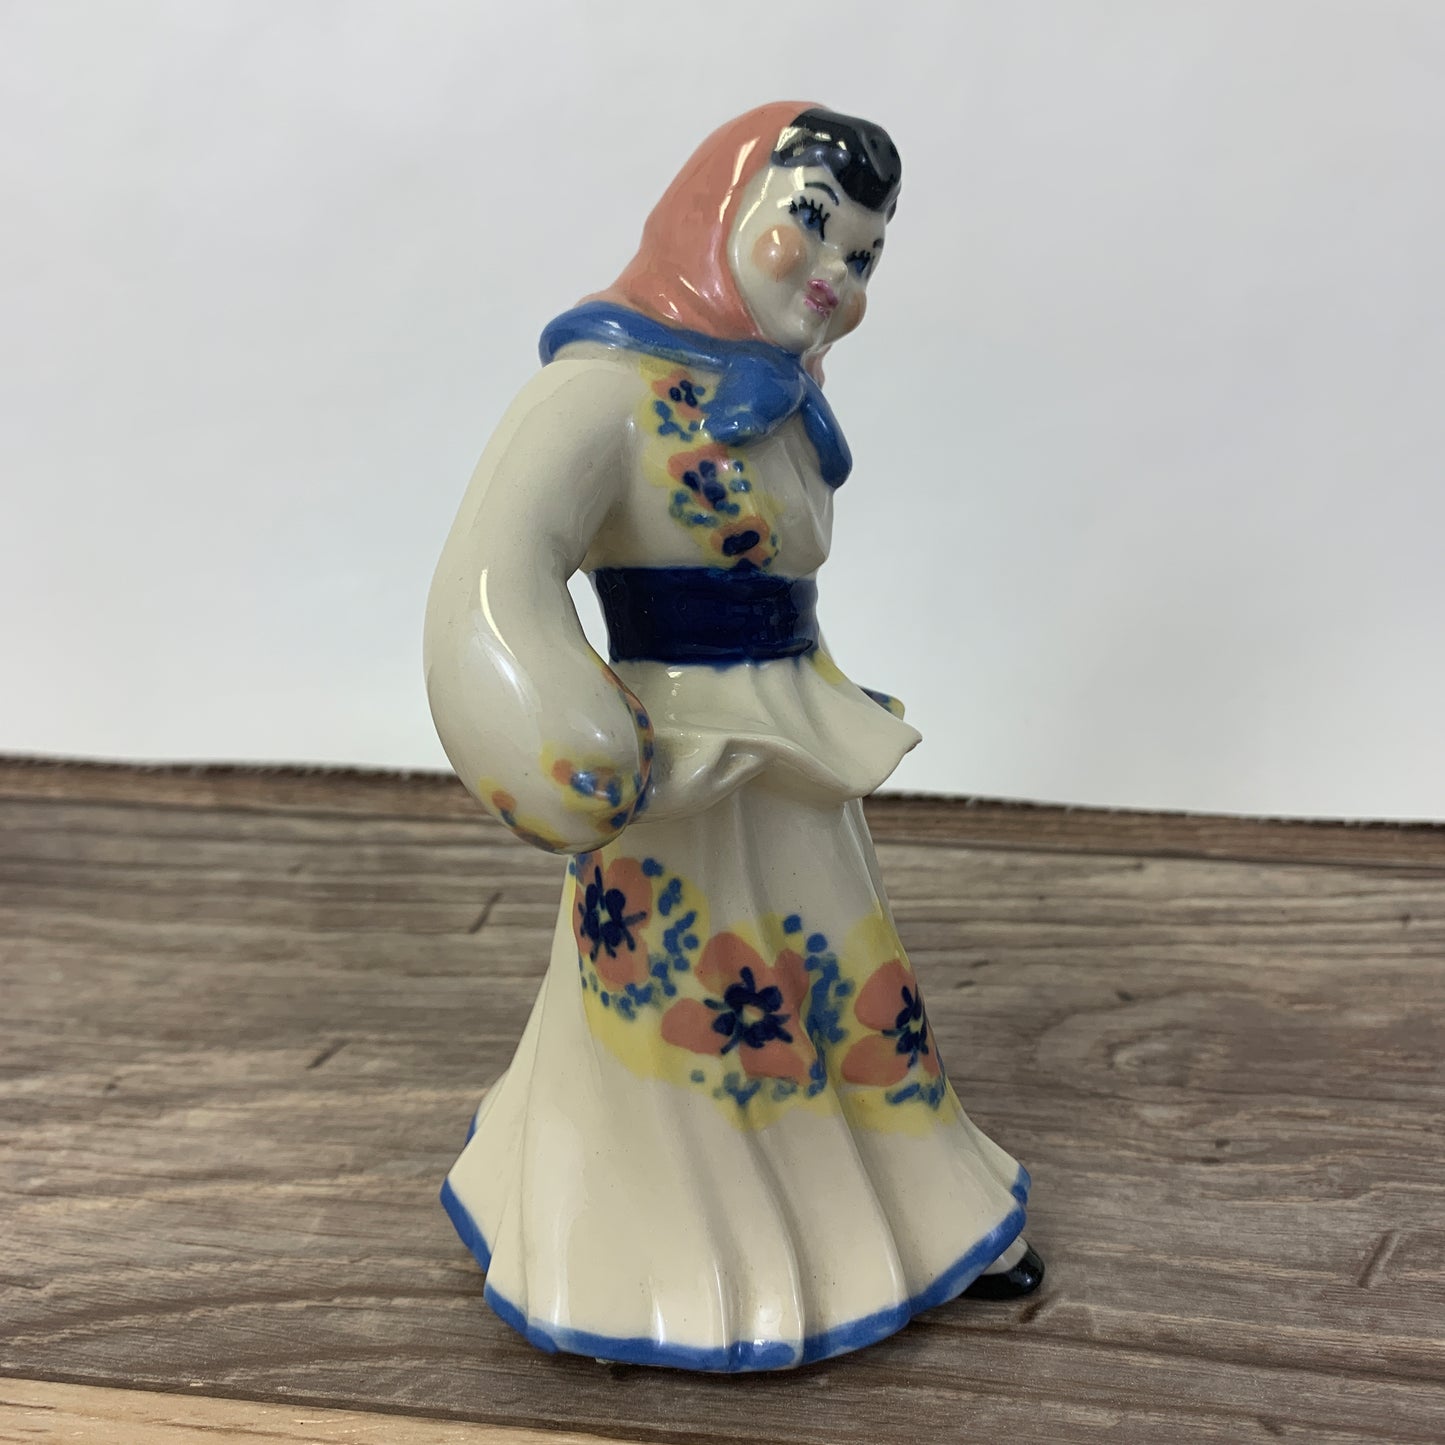 Vintage Ceramic Studios Dancing Girl, Hand Painted Ceramic Gypsy Figurine Pink and Blue